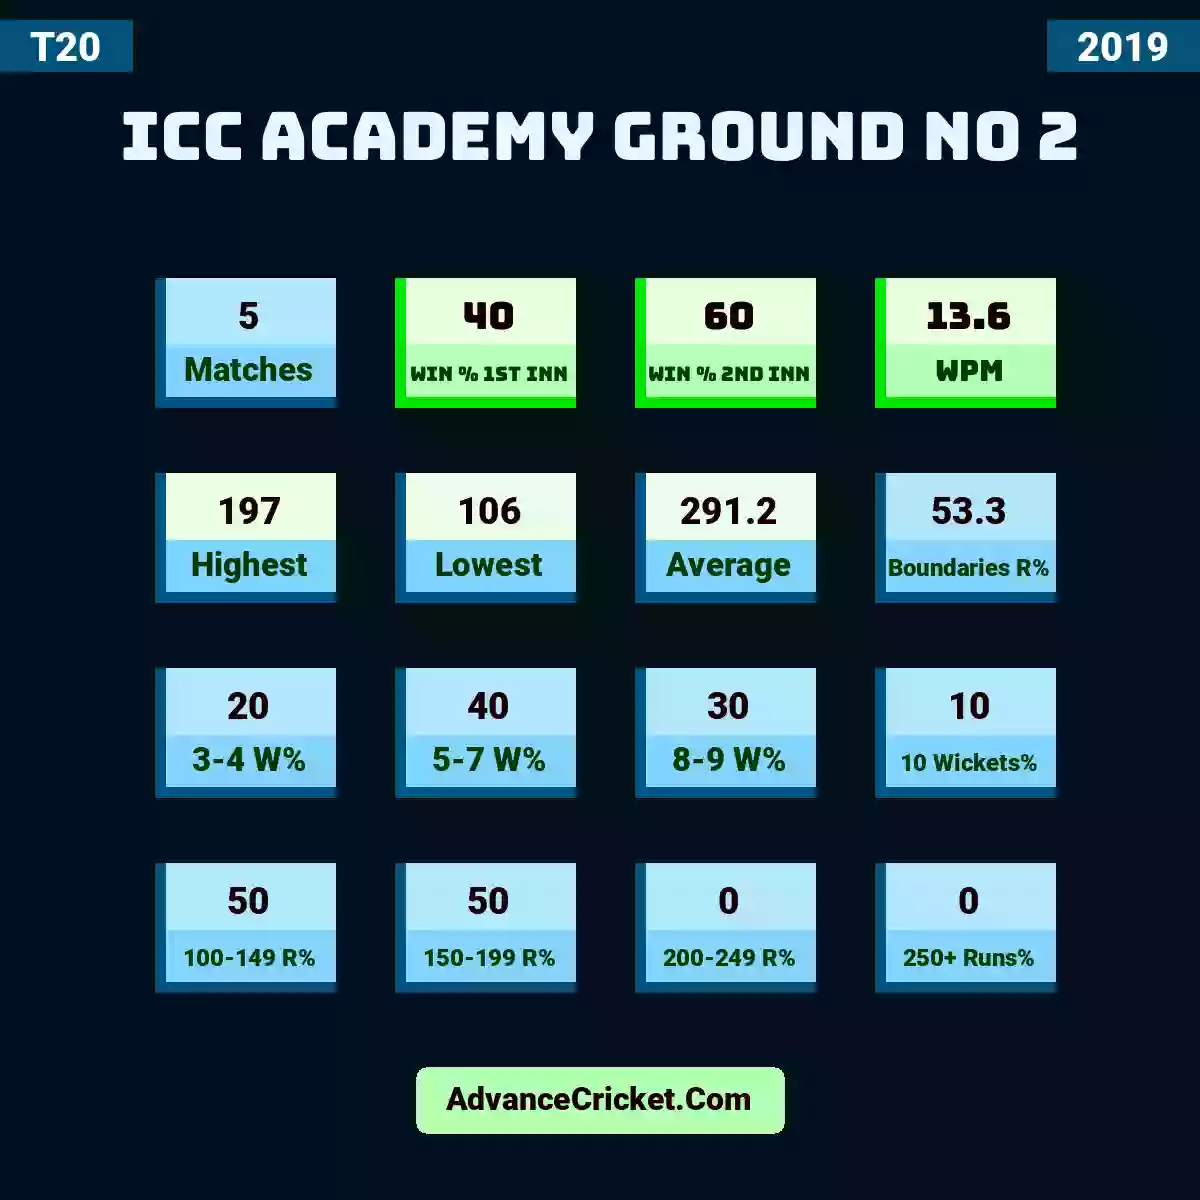 Image showing ICC Academy Ground No 2 with Matches: 5, Win % 1st Inn: 40, Win % 2nd Inn: 60, WPM: 13.6, Highest: 197, Lowest: 106, Average: 291.2, Boundaries R%: 53.3, 3-4 W%: 20, 5-7 W%: 40, 8-9 W%: 30, 10 Wickets%: 10, 100-149 R%: 50, 150-199 R%: 50, 200-249 R%: 0, 250+ Runs%: 0.